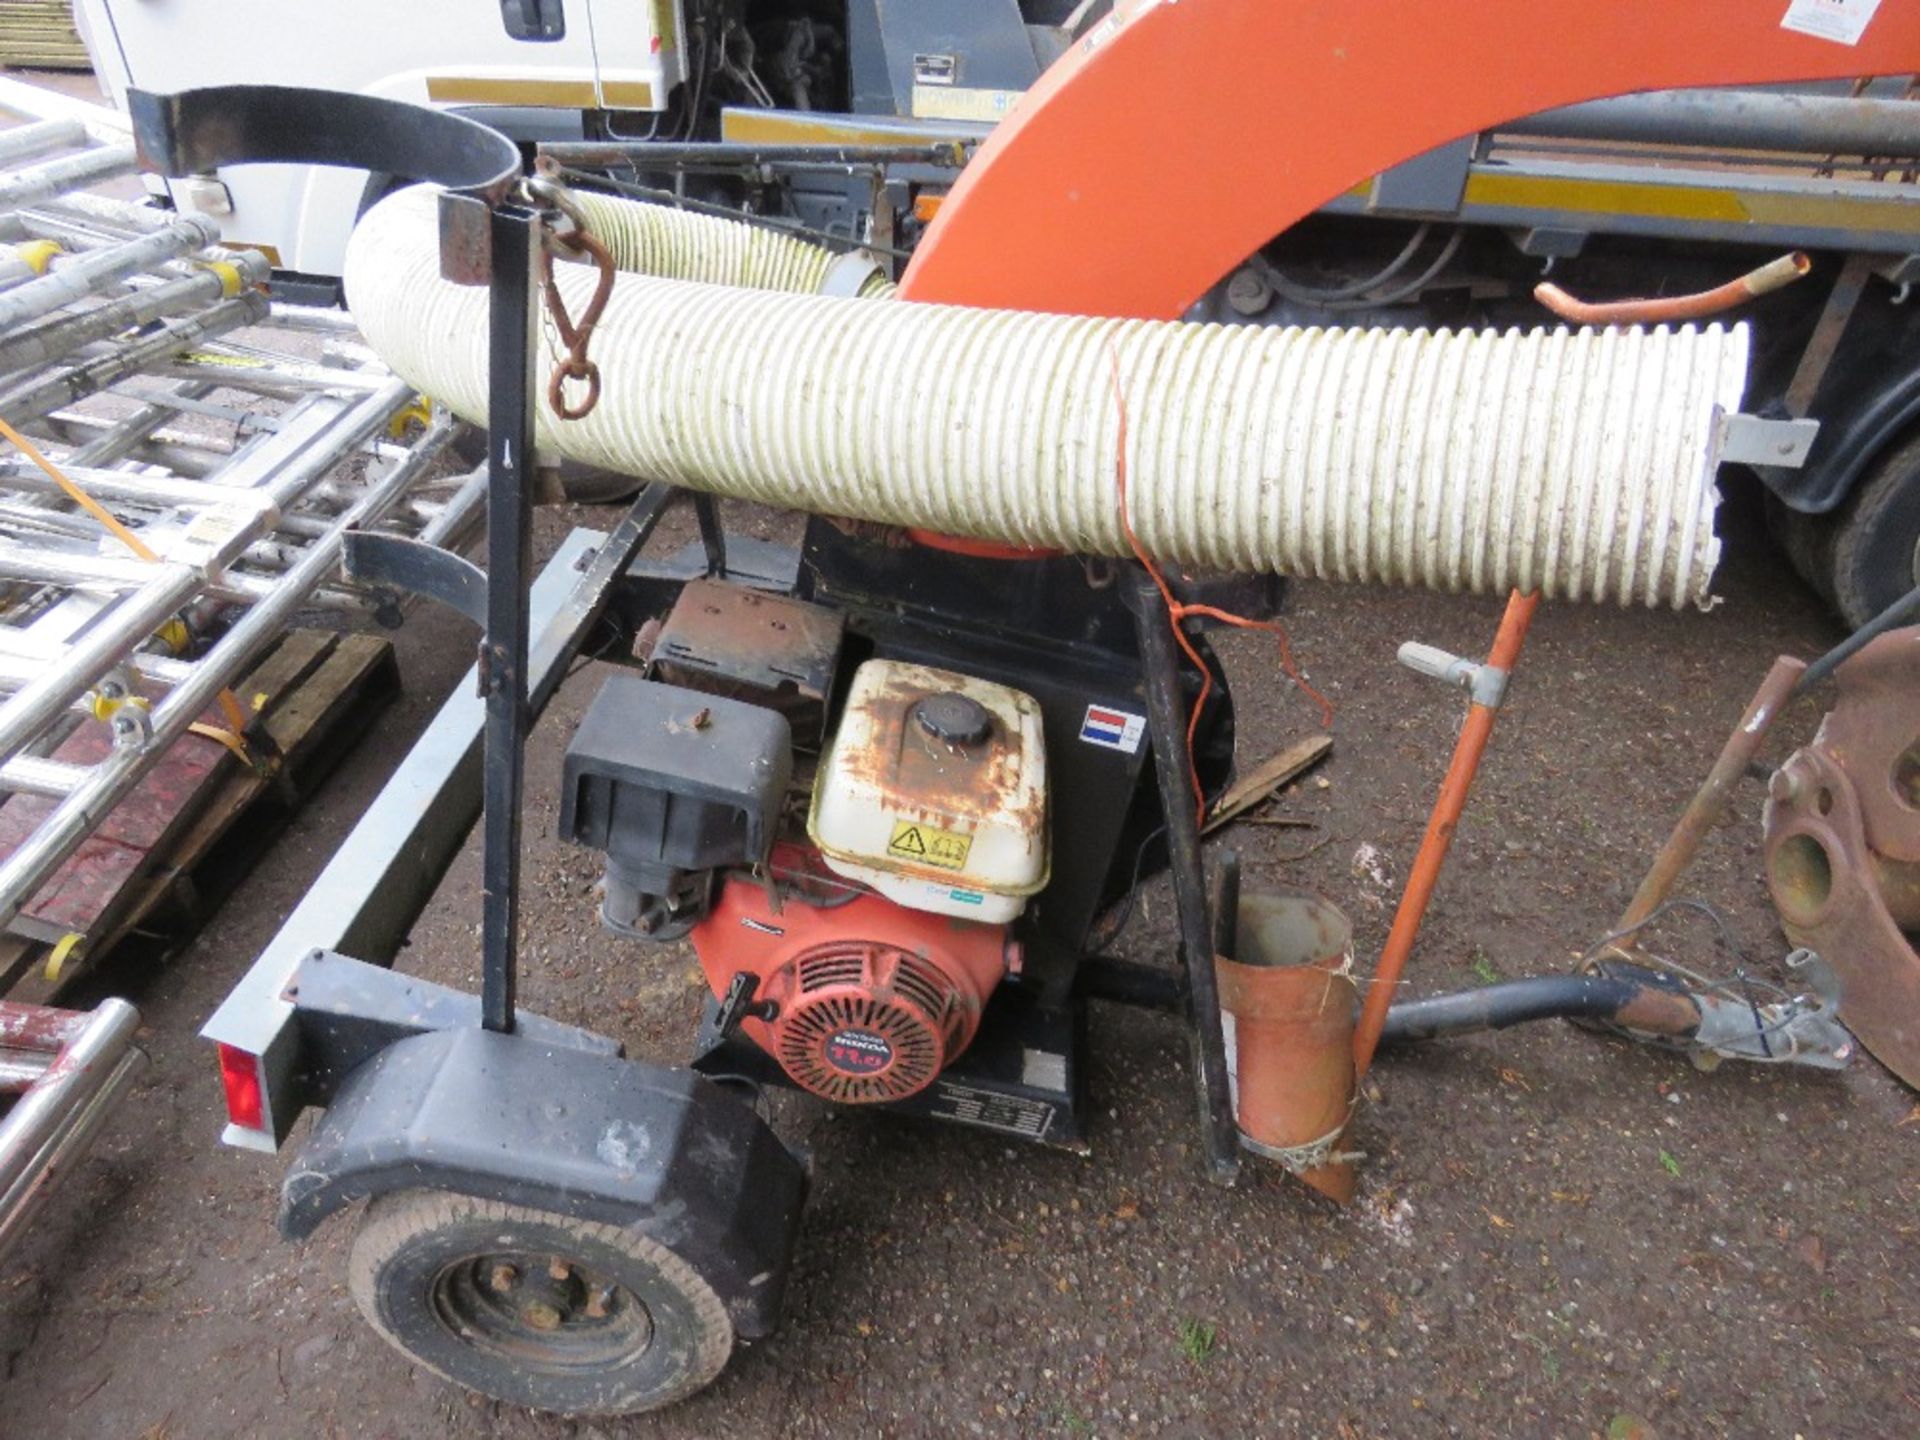 TRILO TOWED PADDOCK VAC UNIT, HONDA ENGINE 11HP, WHEN TESTED WAS SEEN TO RUN AND SUCK.